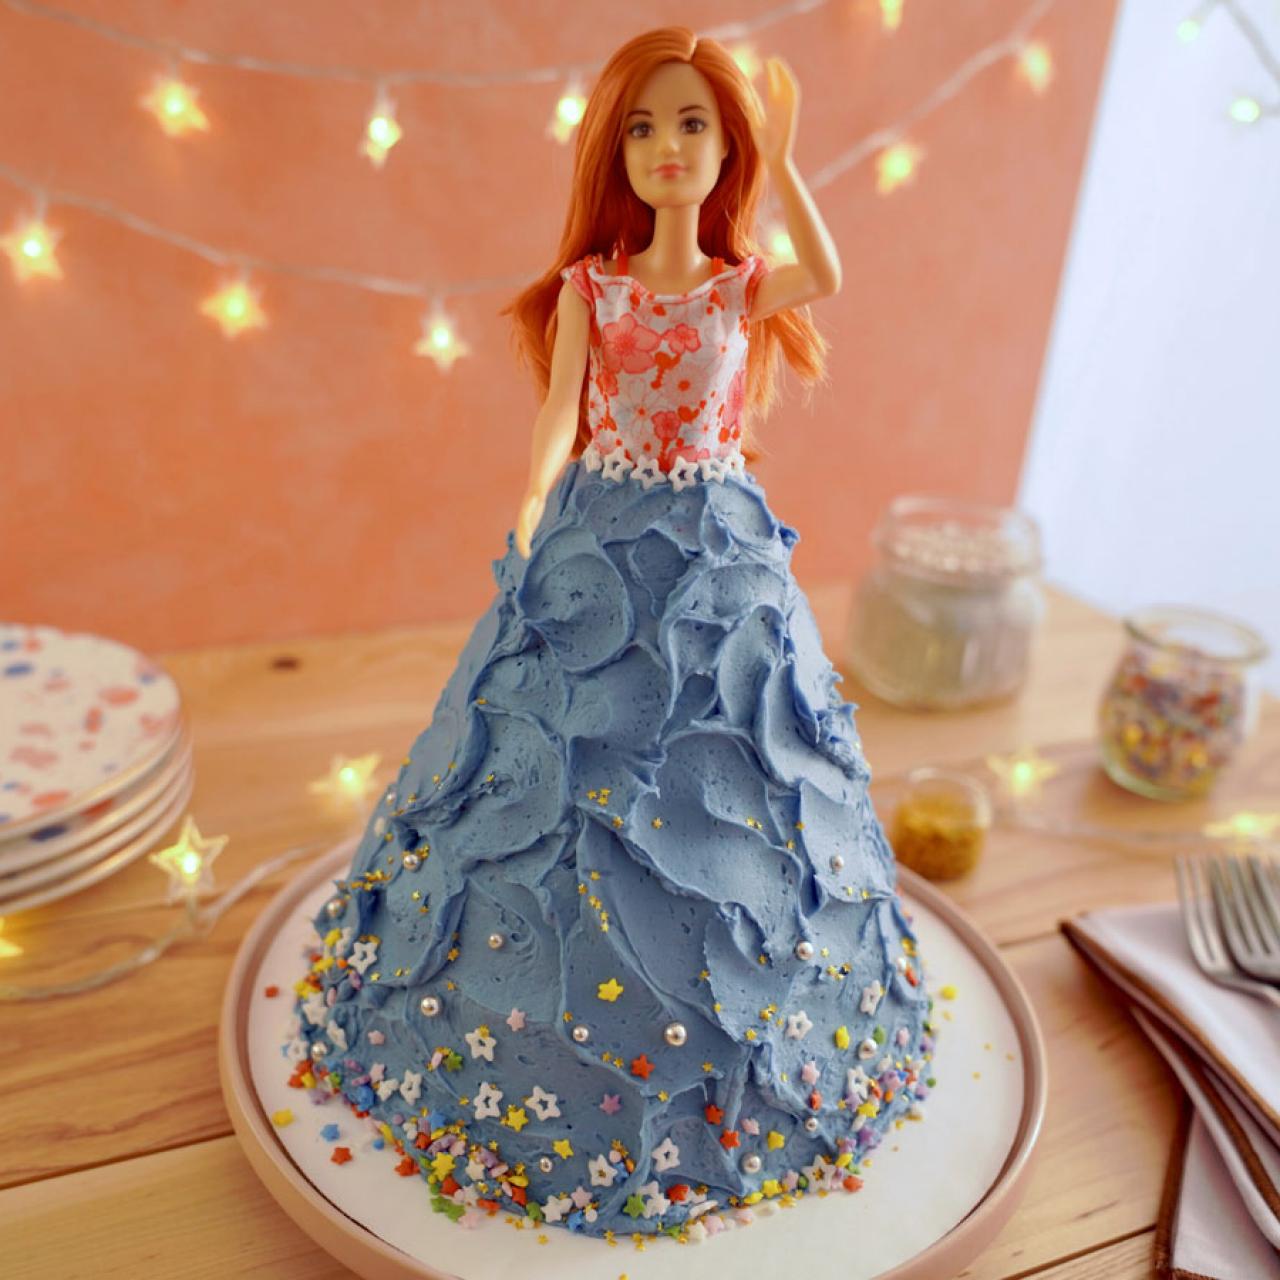 Blueberry Doll Cake Recipe, Molly Yeh